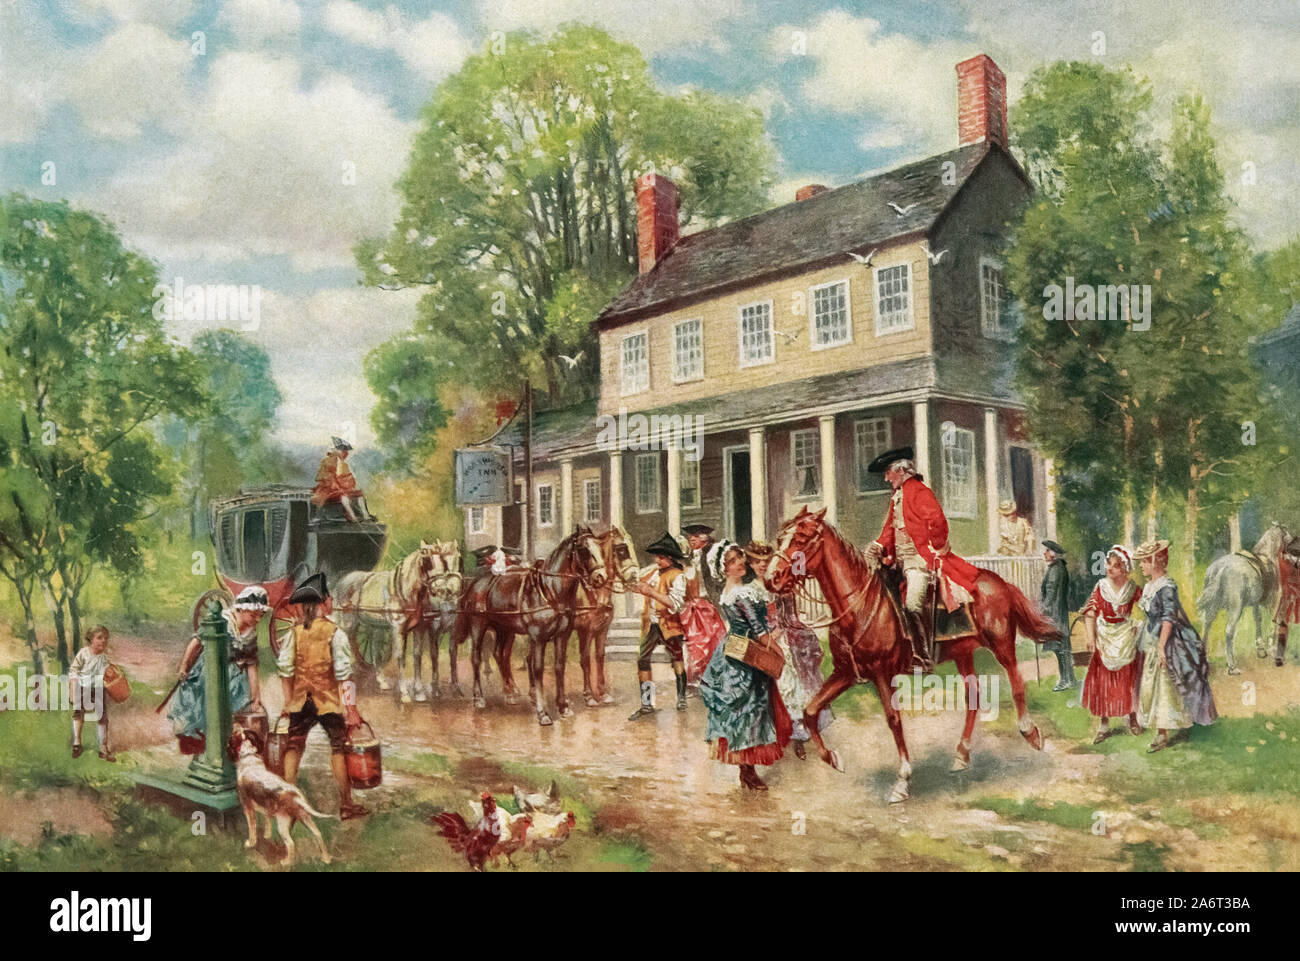 The Concord Stage.  After a work by E. Percy Moran.  Concord and nearby Lexington were the sites of the first military engagements of the American Revolutionary War.  The picture shows an English soldier on horseback. Stock Photo